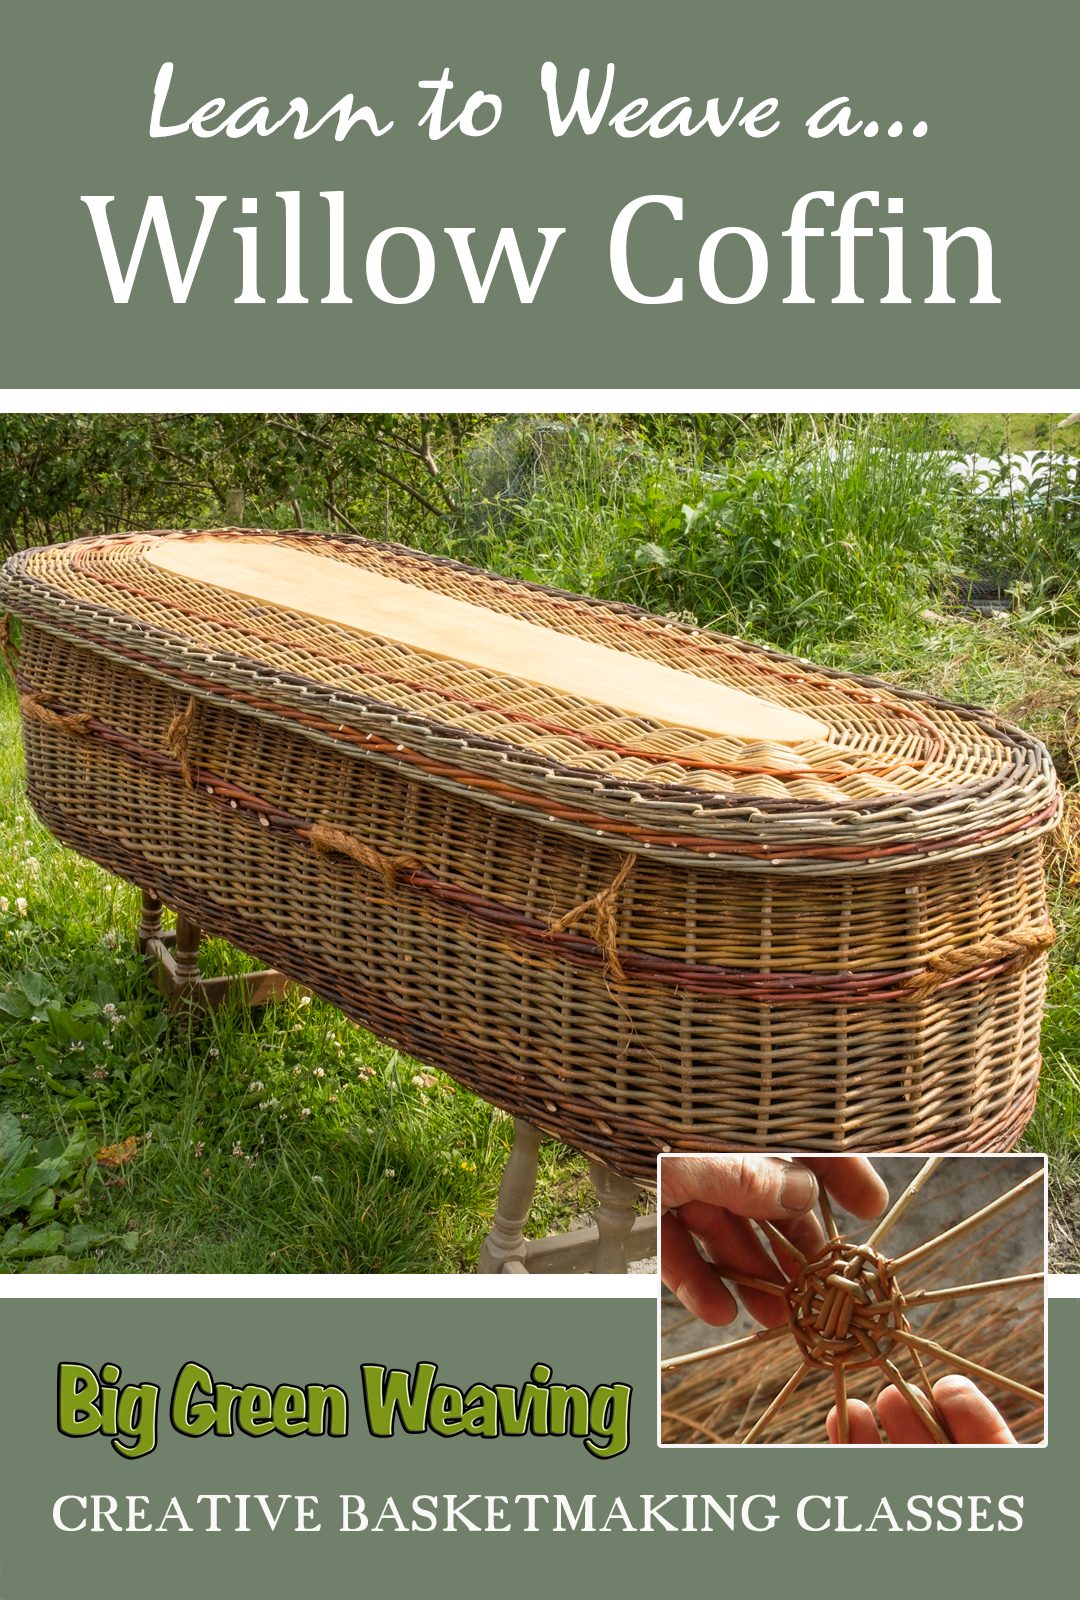 willow coffin